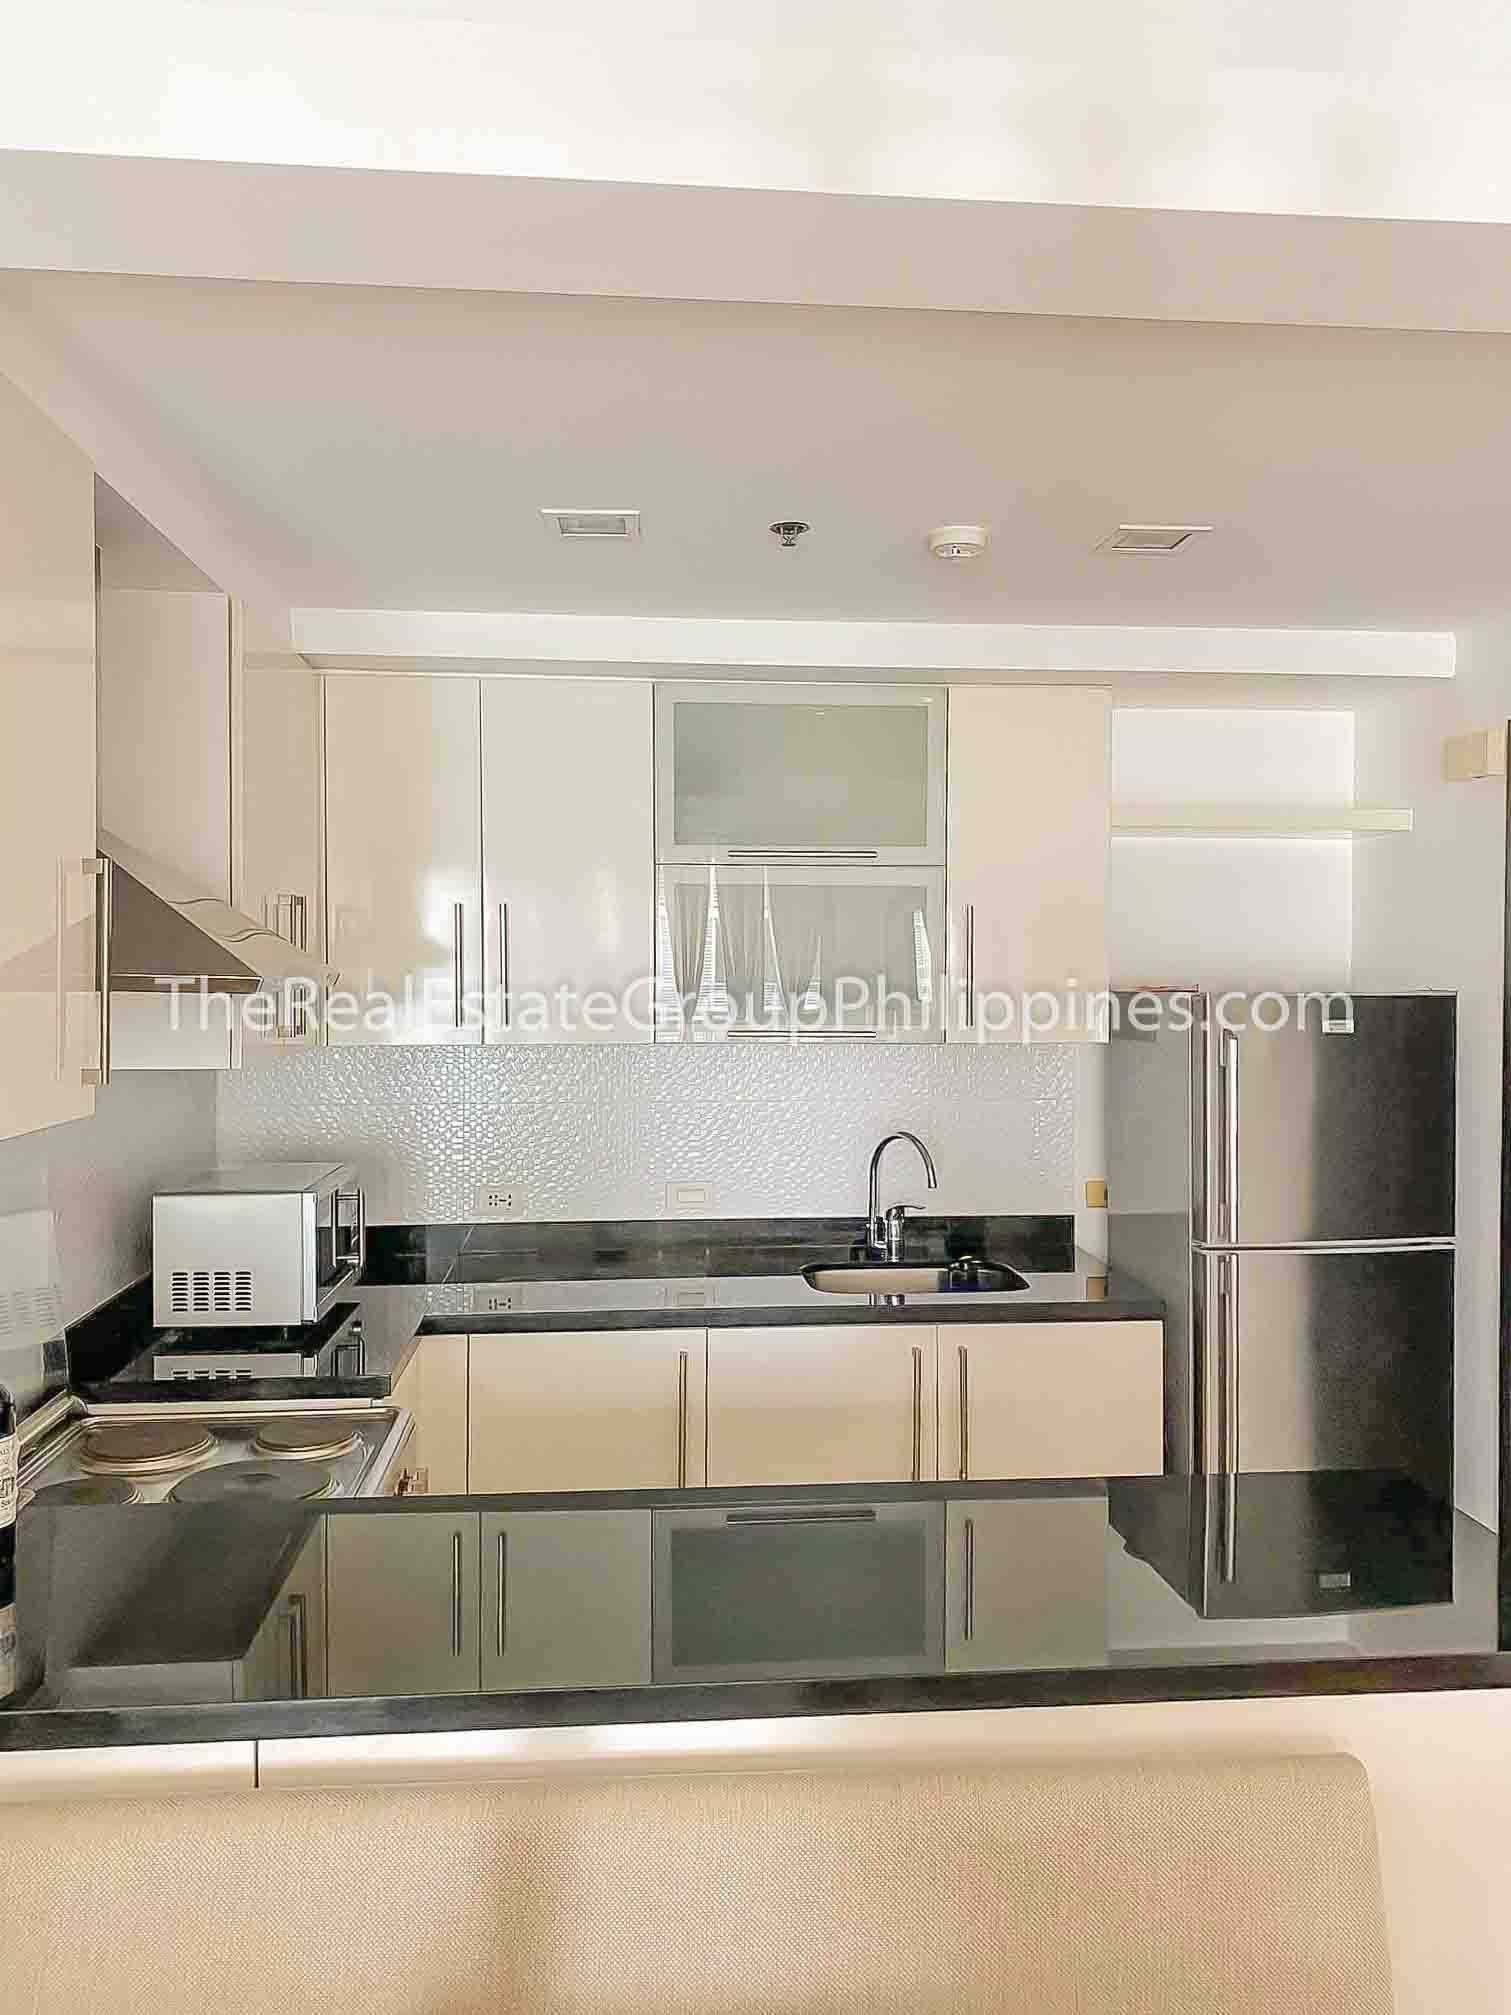 1BR Condo For Rent, East Tower, One Serendra, BGC 14E1-2